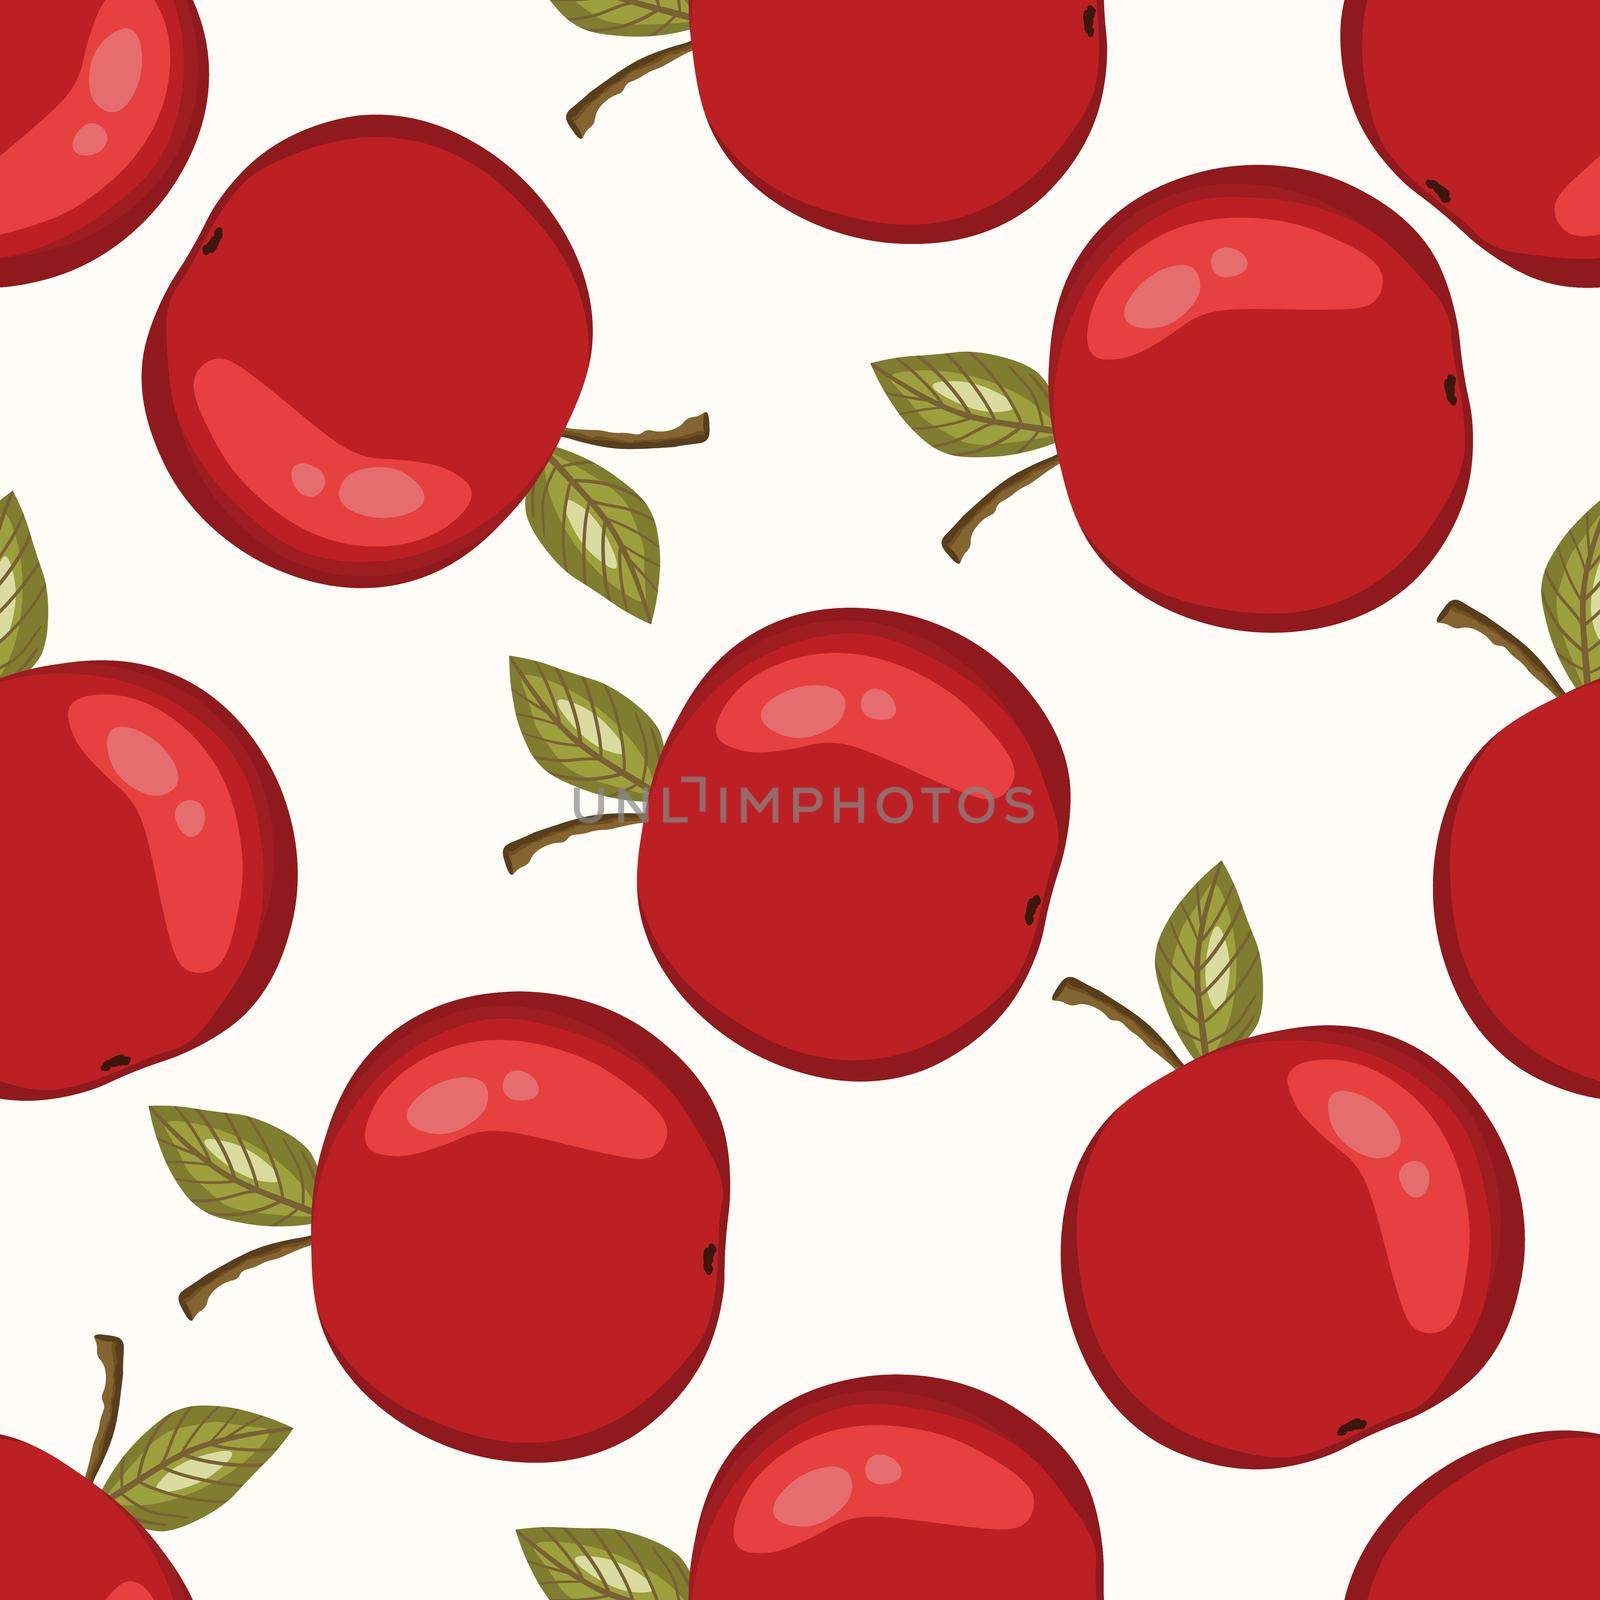 Seamless pattern with apple on white background. Natural delicious fresh ripe tasty fruit. Vector illustration for print, fabric, textile, banner, design. Stylized apples with leaves. Food concept